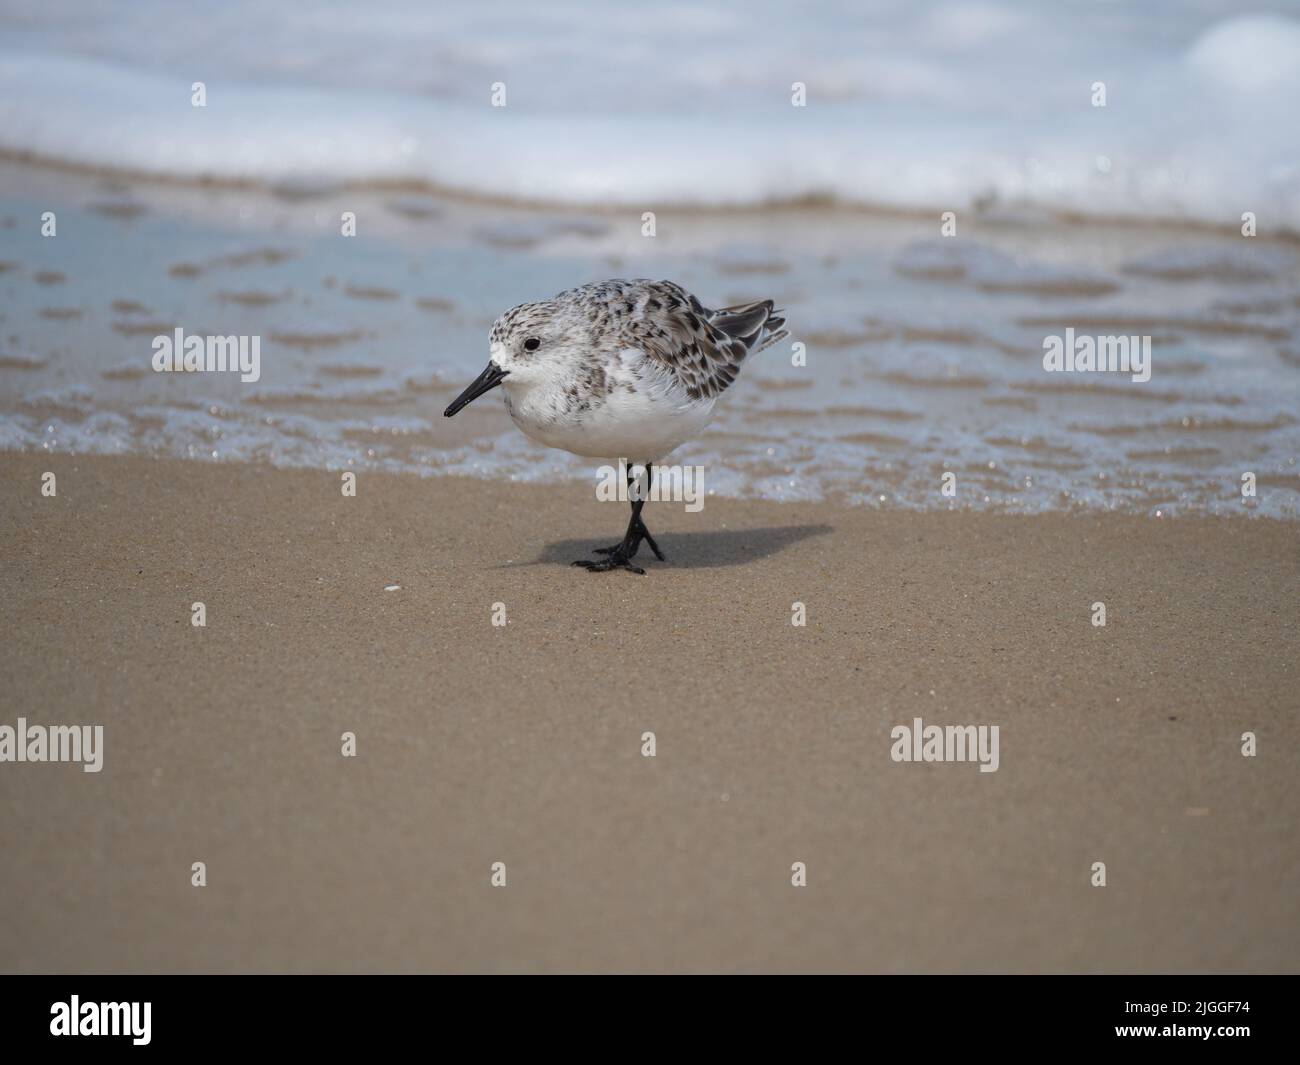 Adult Sanderling with black legs and beak walking on a sandy beach with sea foam in the background in North Carolina. Photographed in profile with a s Stock Photo